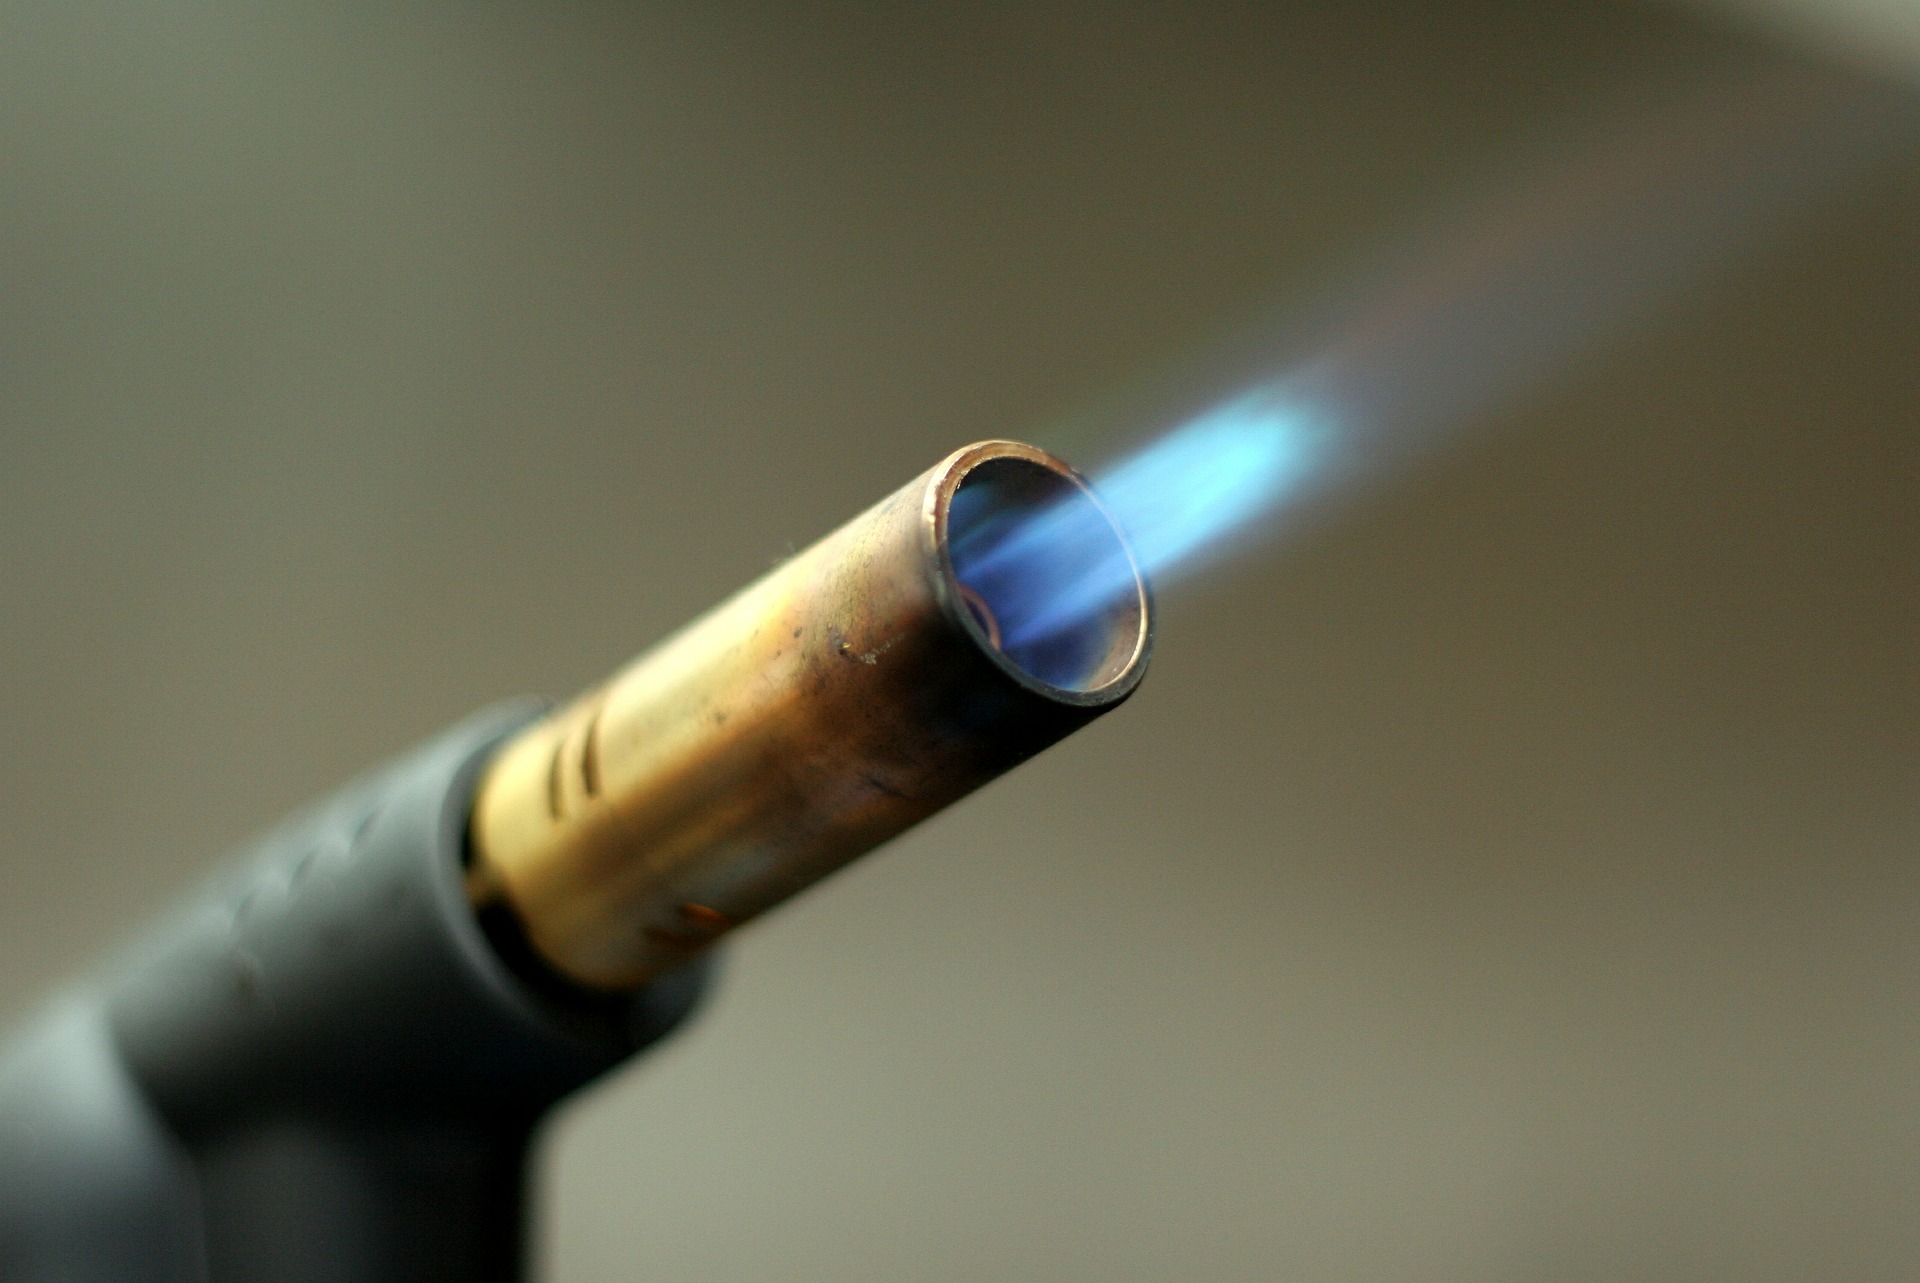 Butane / LPG Gas Canister Can Fit Directly into Flame Torch Guns